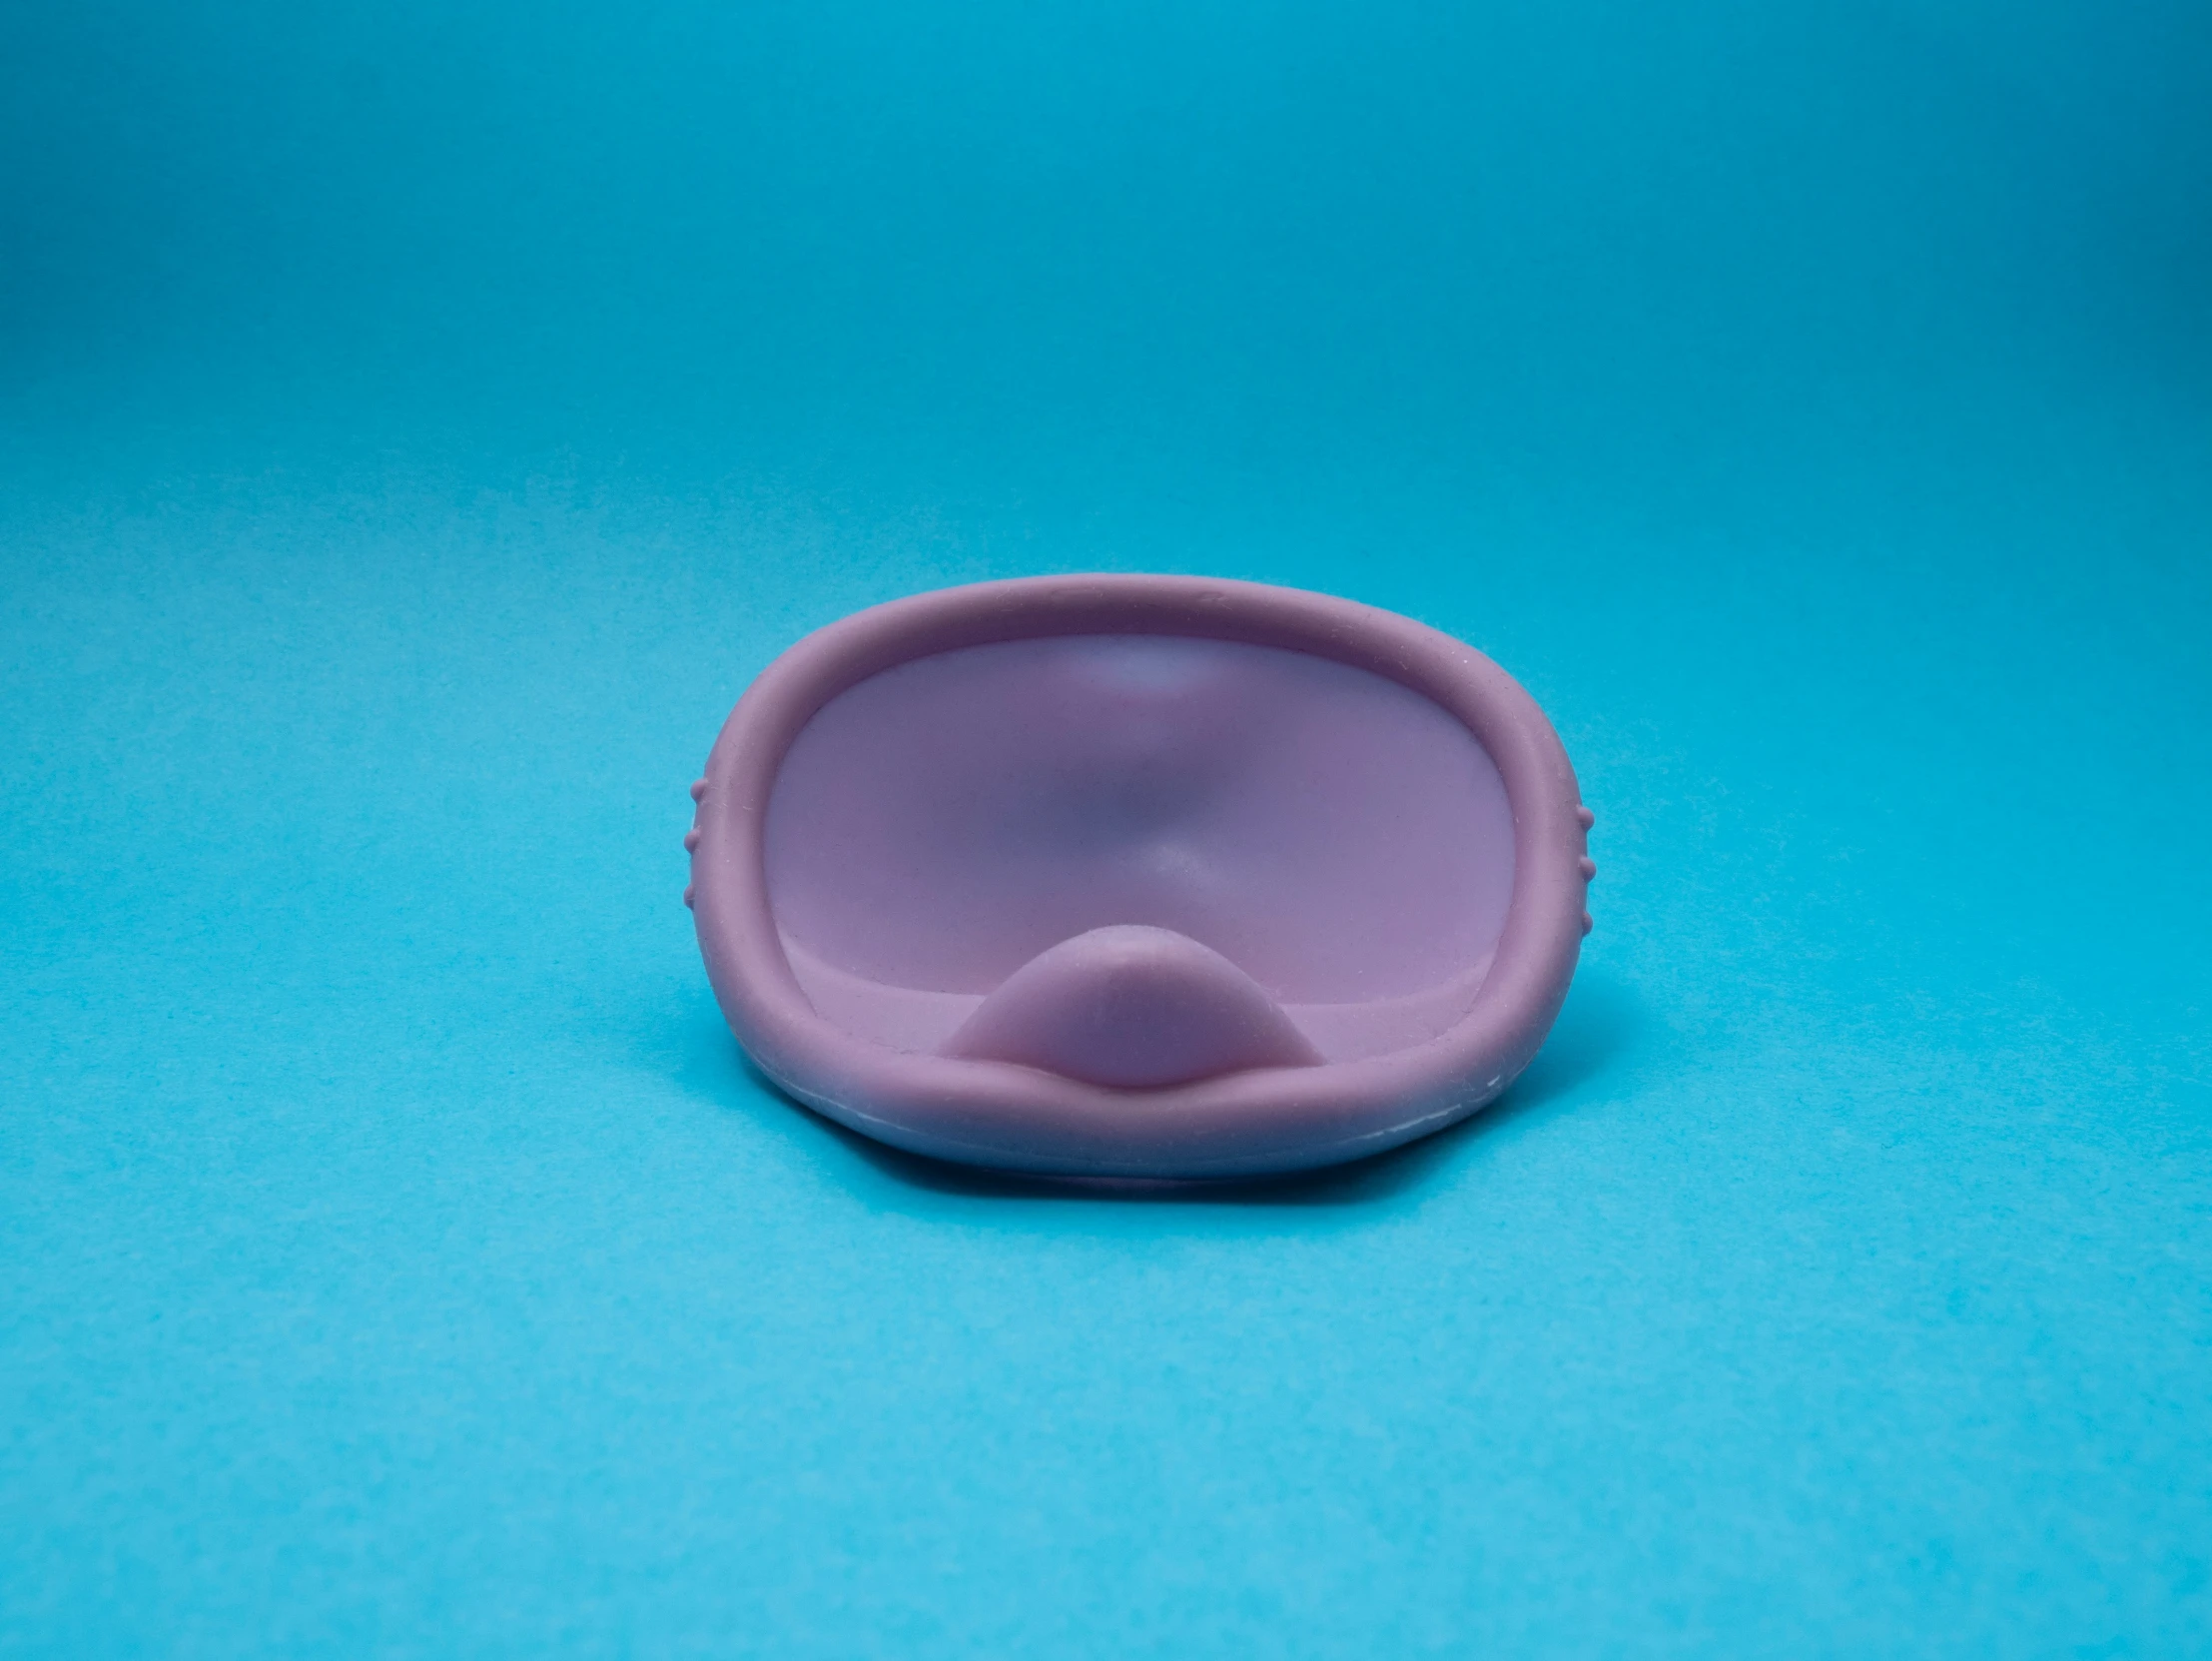 an unlabnished plastic cup sits on a blue background